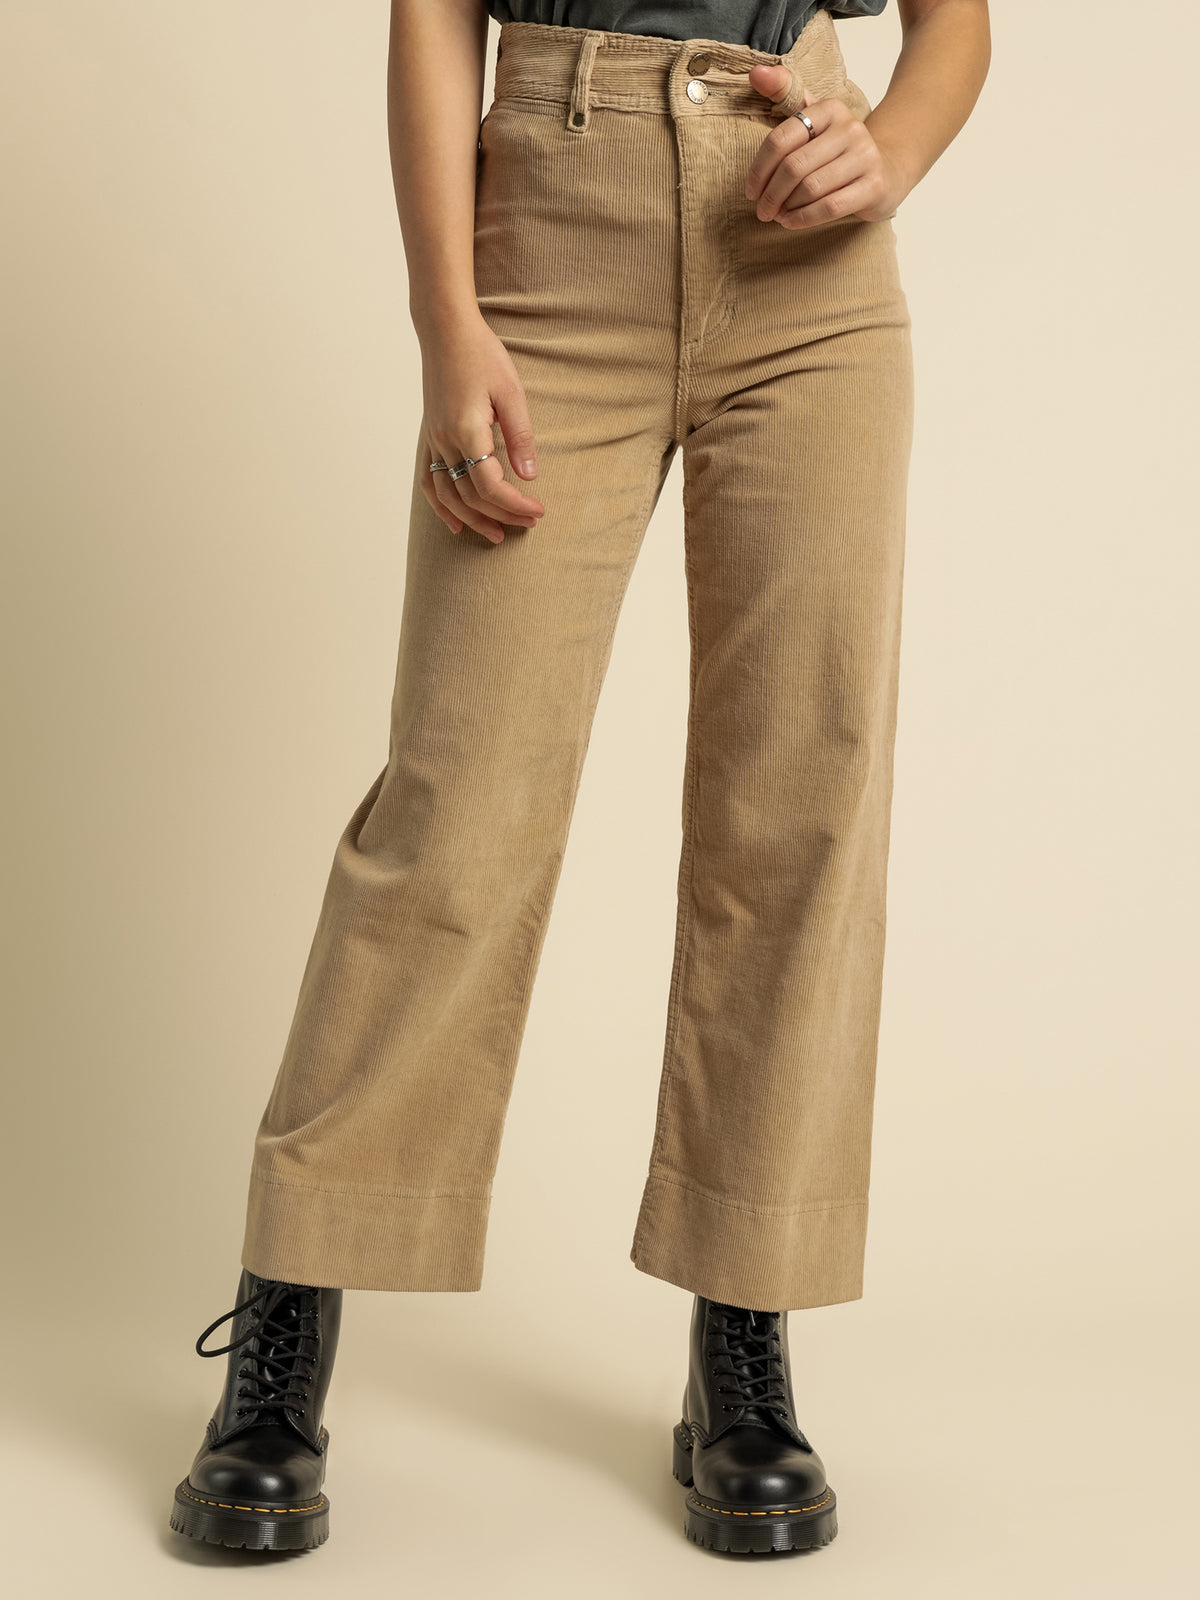 Belle Cord Pants in Sand